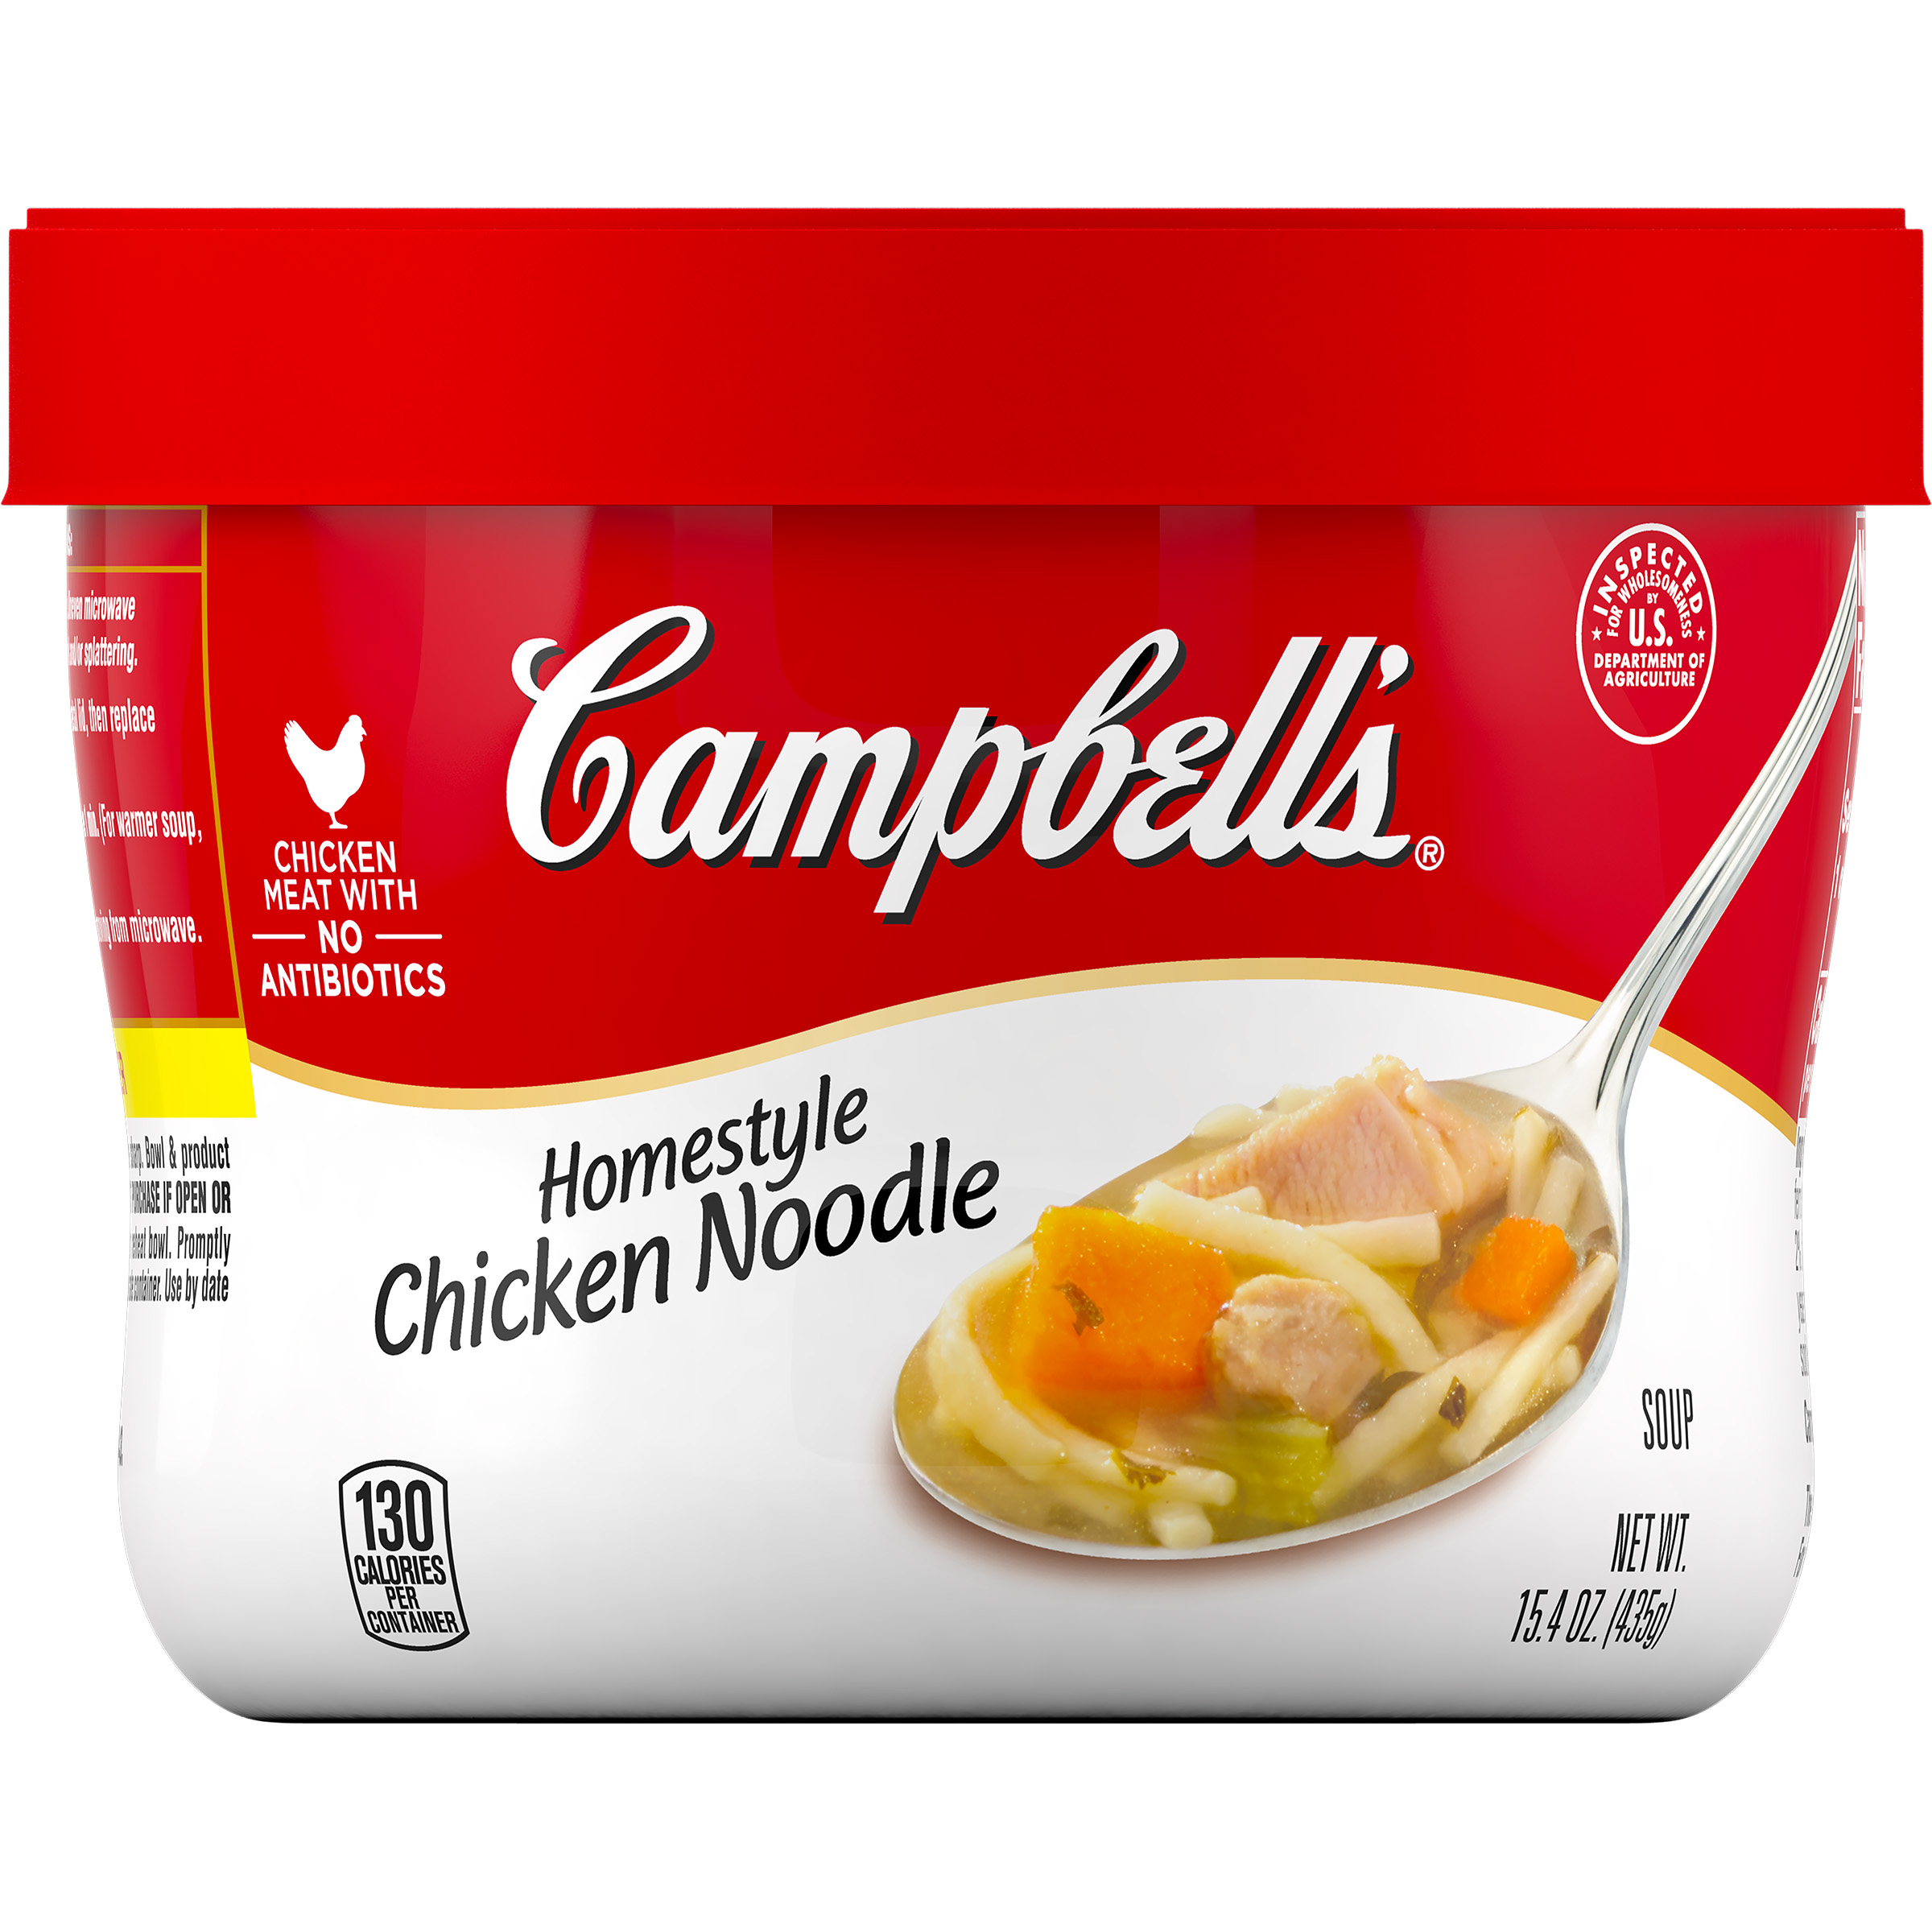 Homestyle Chicken Noodle Soup
Homestyle Chicken Noodle Soup